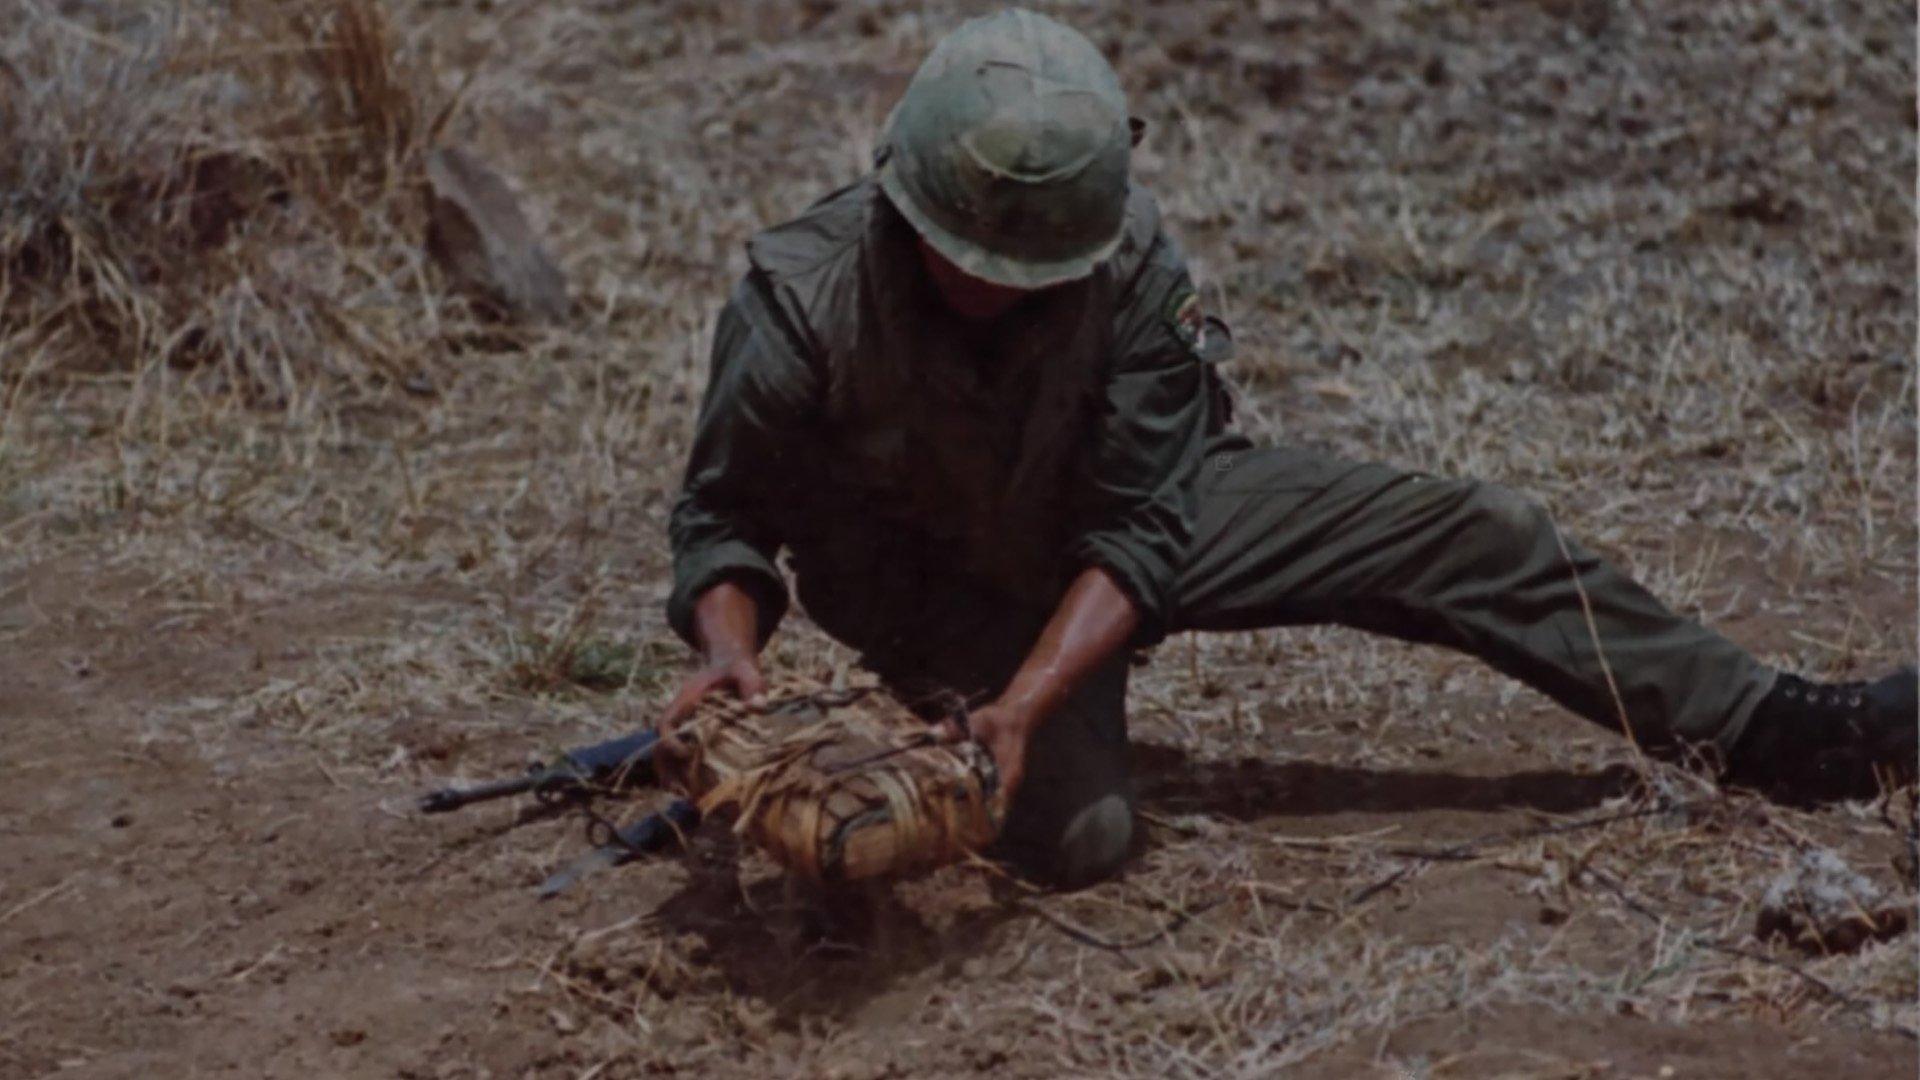 A soldier of the 26th Regiment, ROK Tiger Division, lifts a Viet Cong booby-trap from the ground during a demonstration near HQ, Song Cau, 2 September 1969. Wikimedia Commons photo.